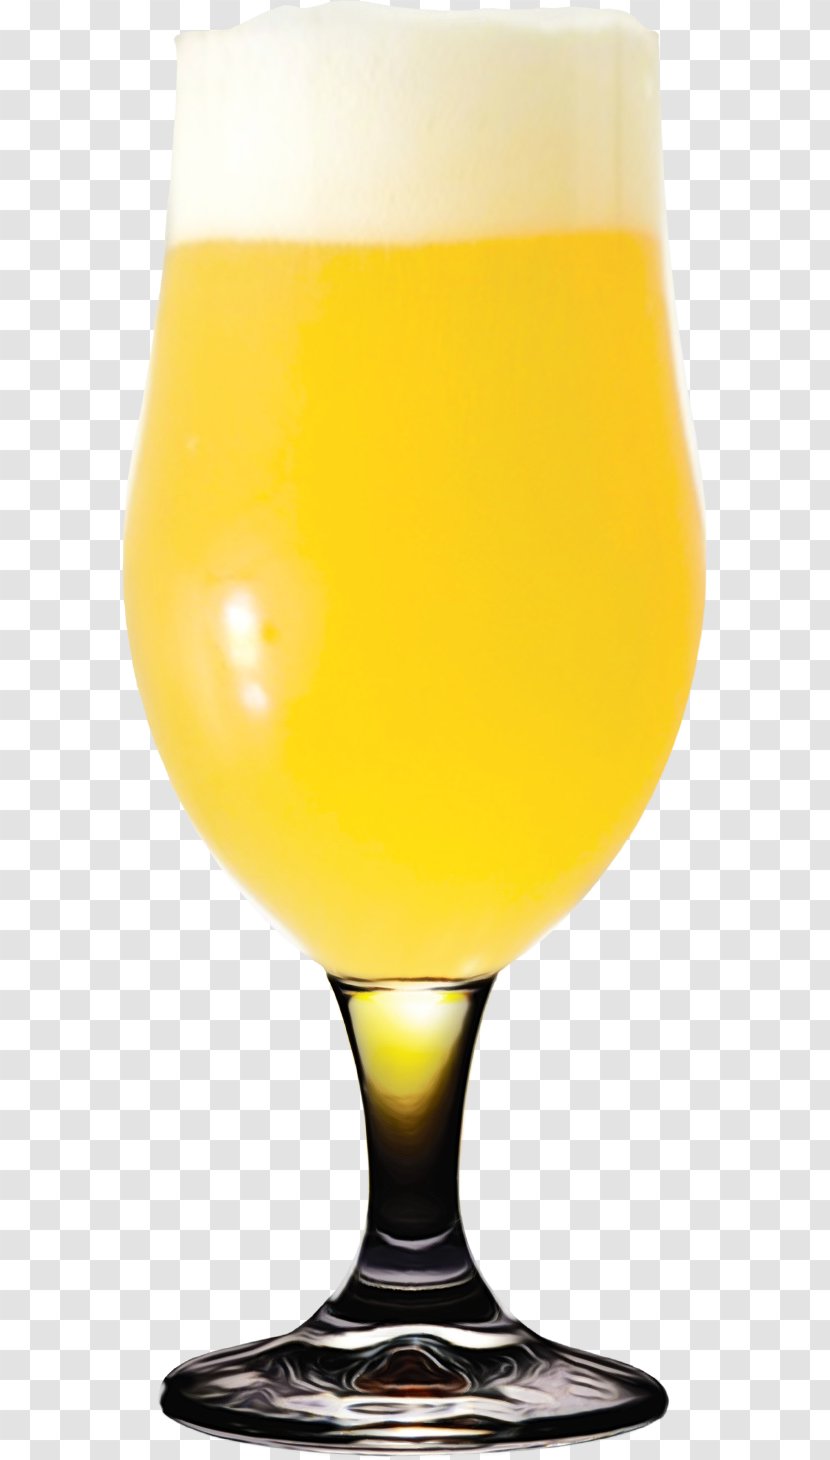 Champagne Glasses Background - Mimosa - Sour Fuzzy Navel Transparent PNG